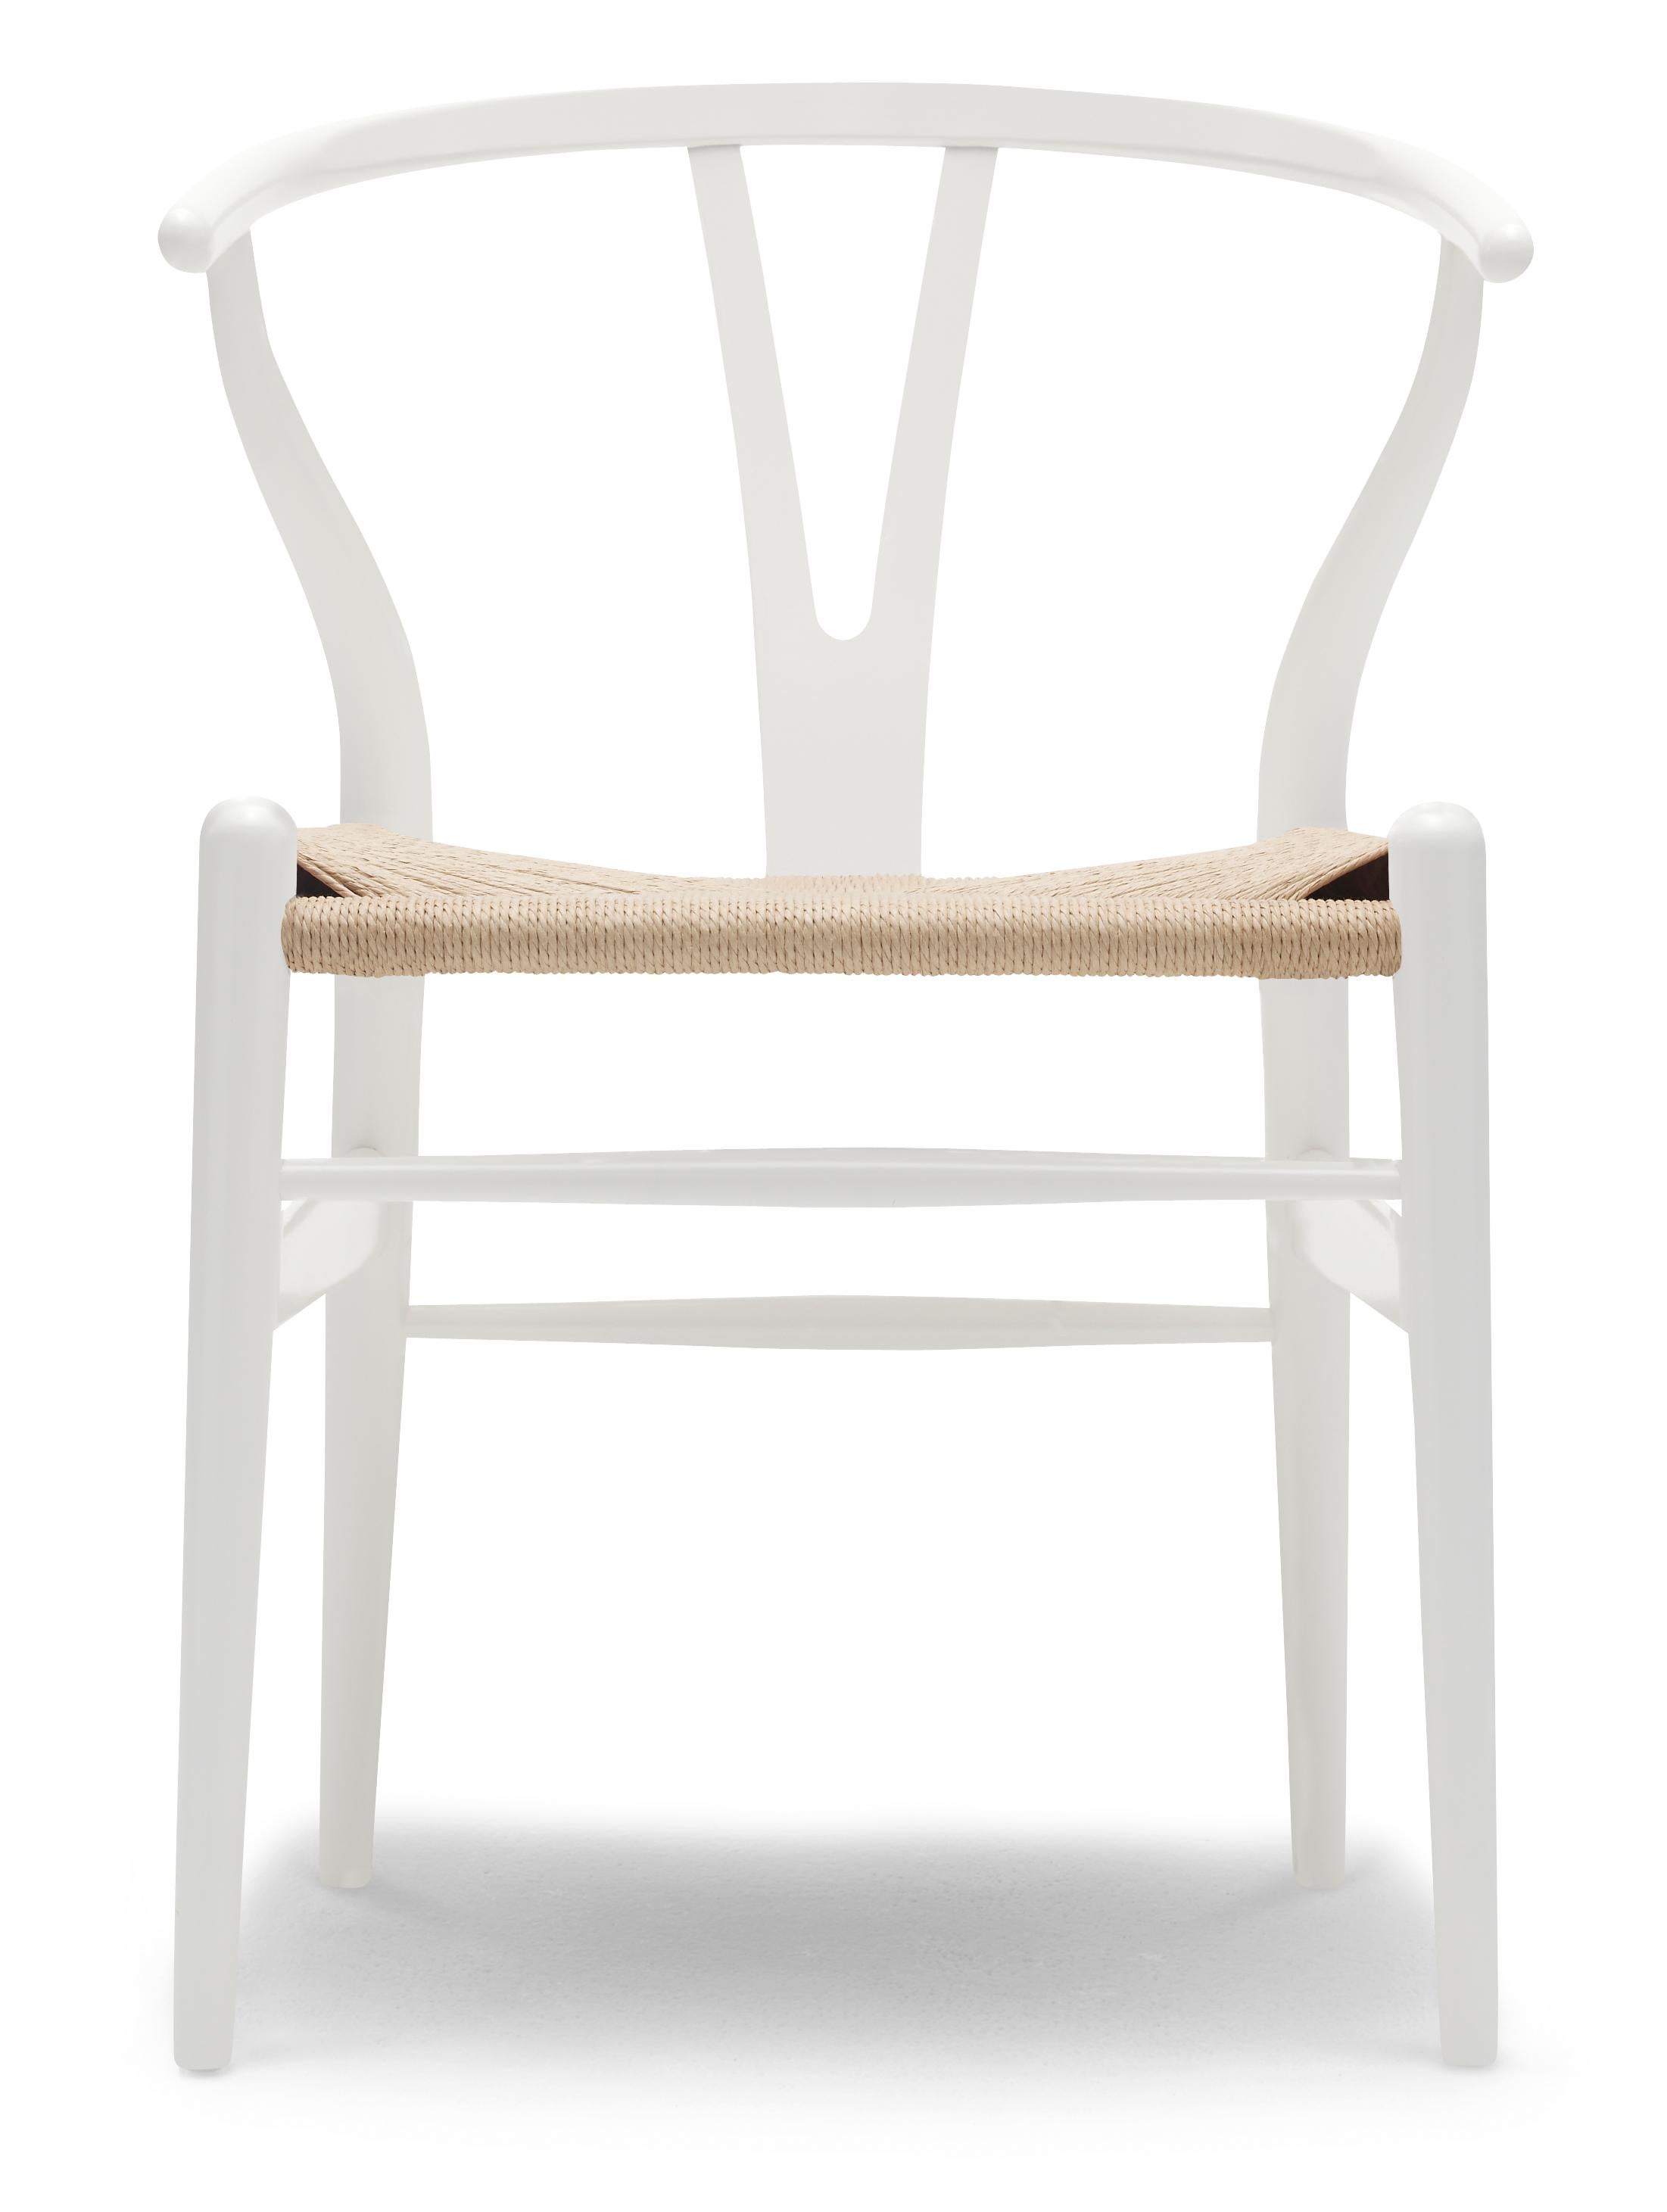 Beige (NCS S0502-Y) CH24 Wishbone Chair in Color Finishes with Natural Papercord Seat by Hans Wegner